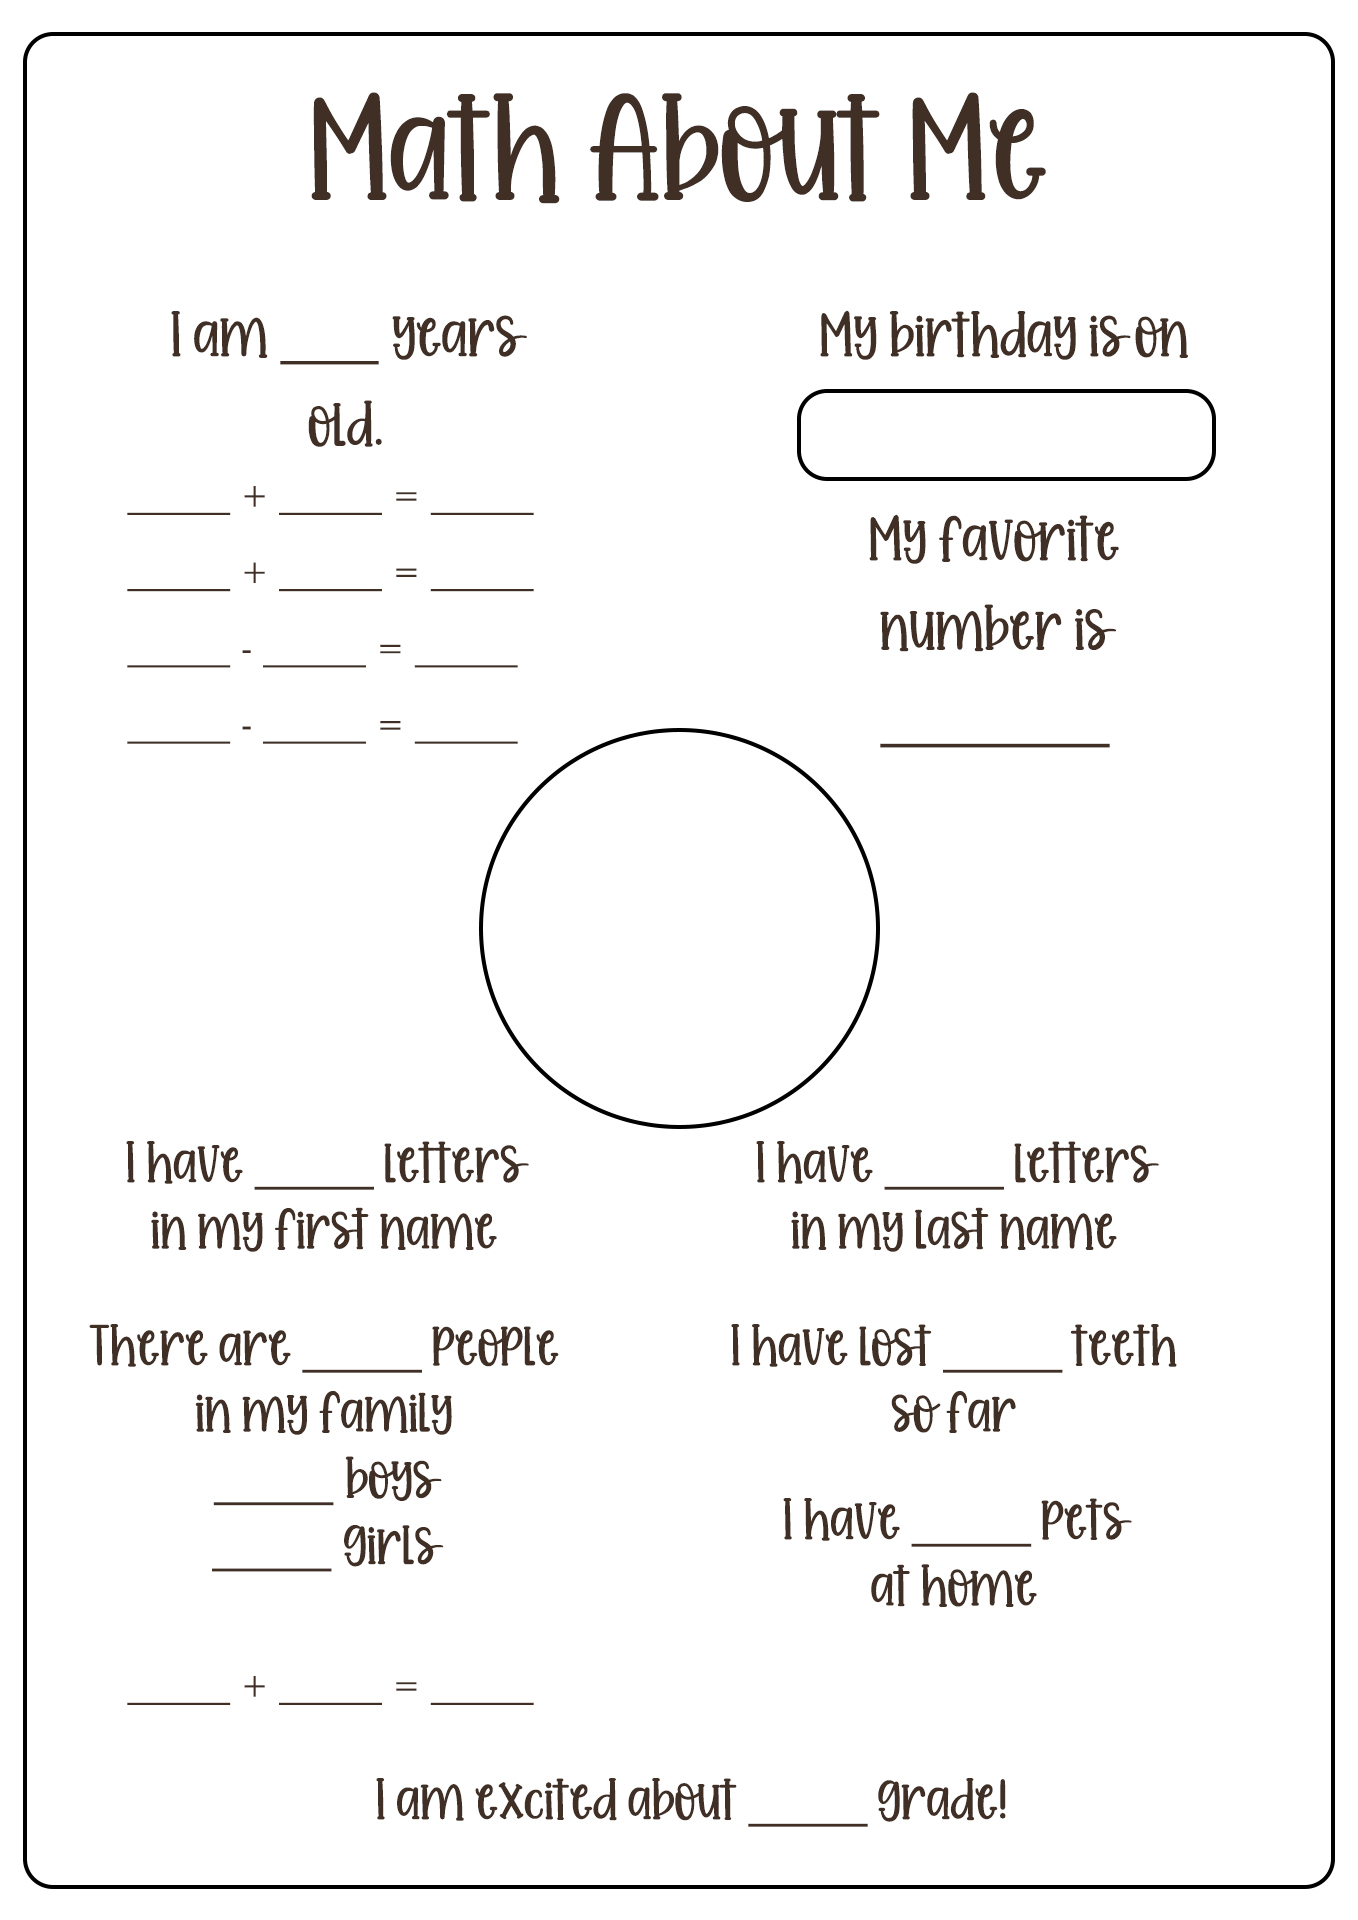 All About Me Math Worksheet Image